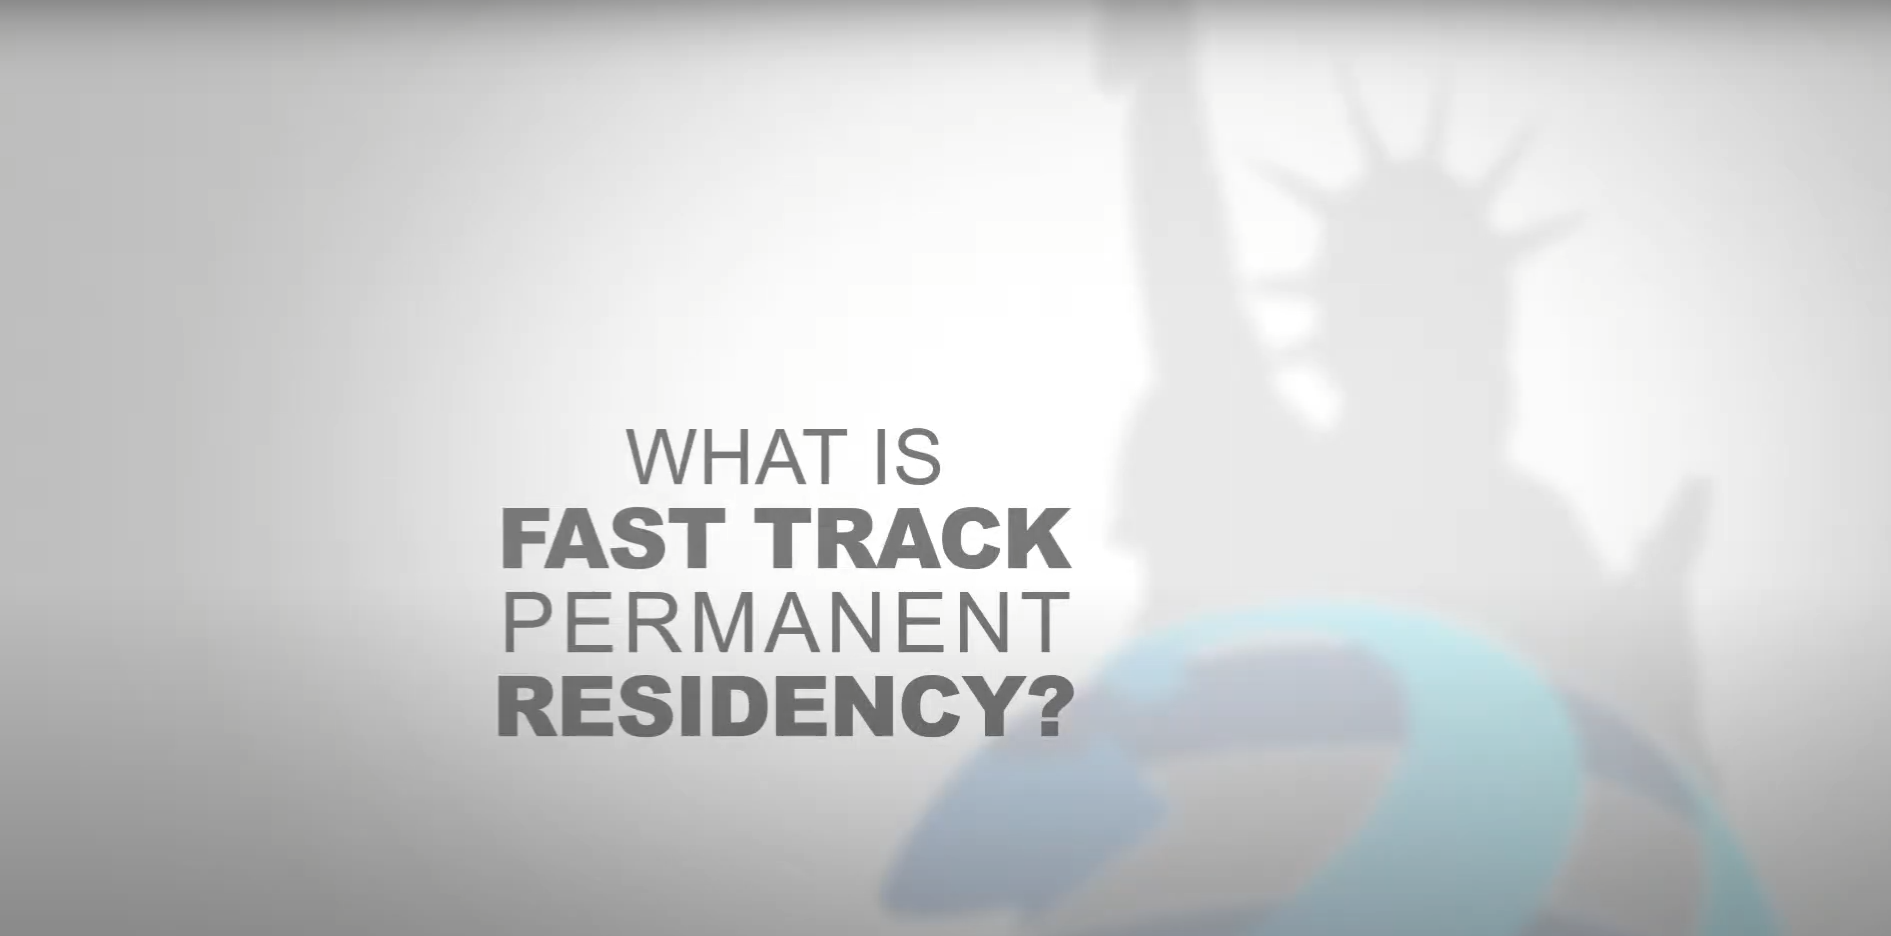 What is Fast Track Permanent Residency?